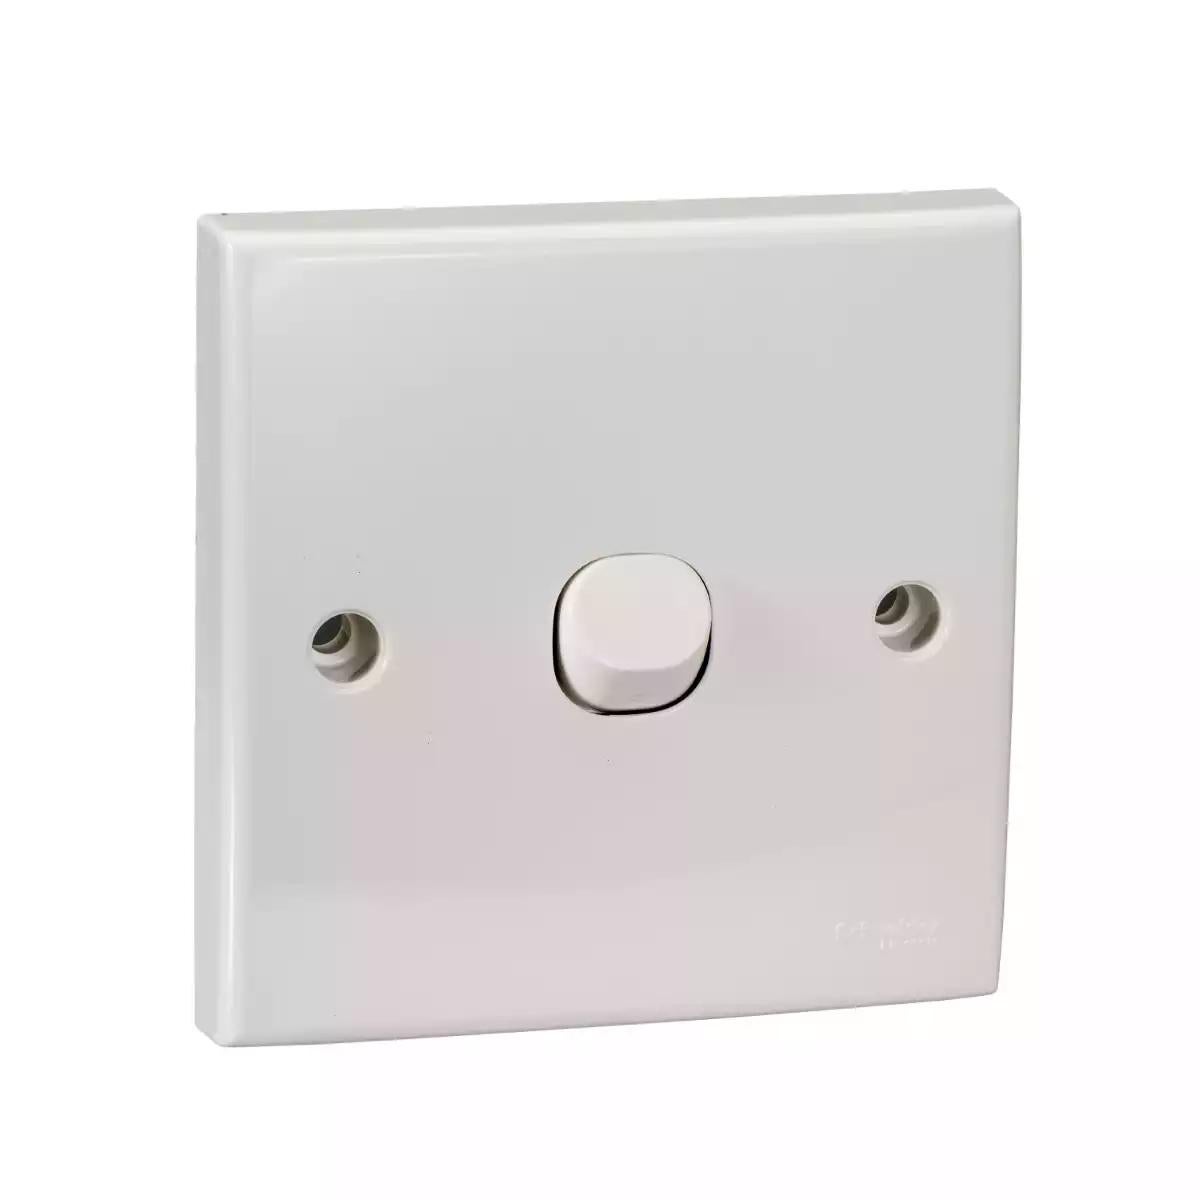 Schneider Electric S-Classic - 1-way switch - 1 gang - white